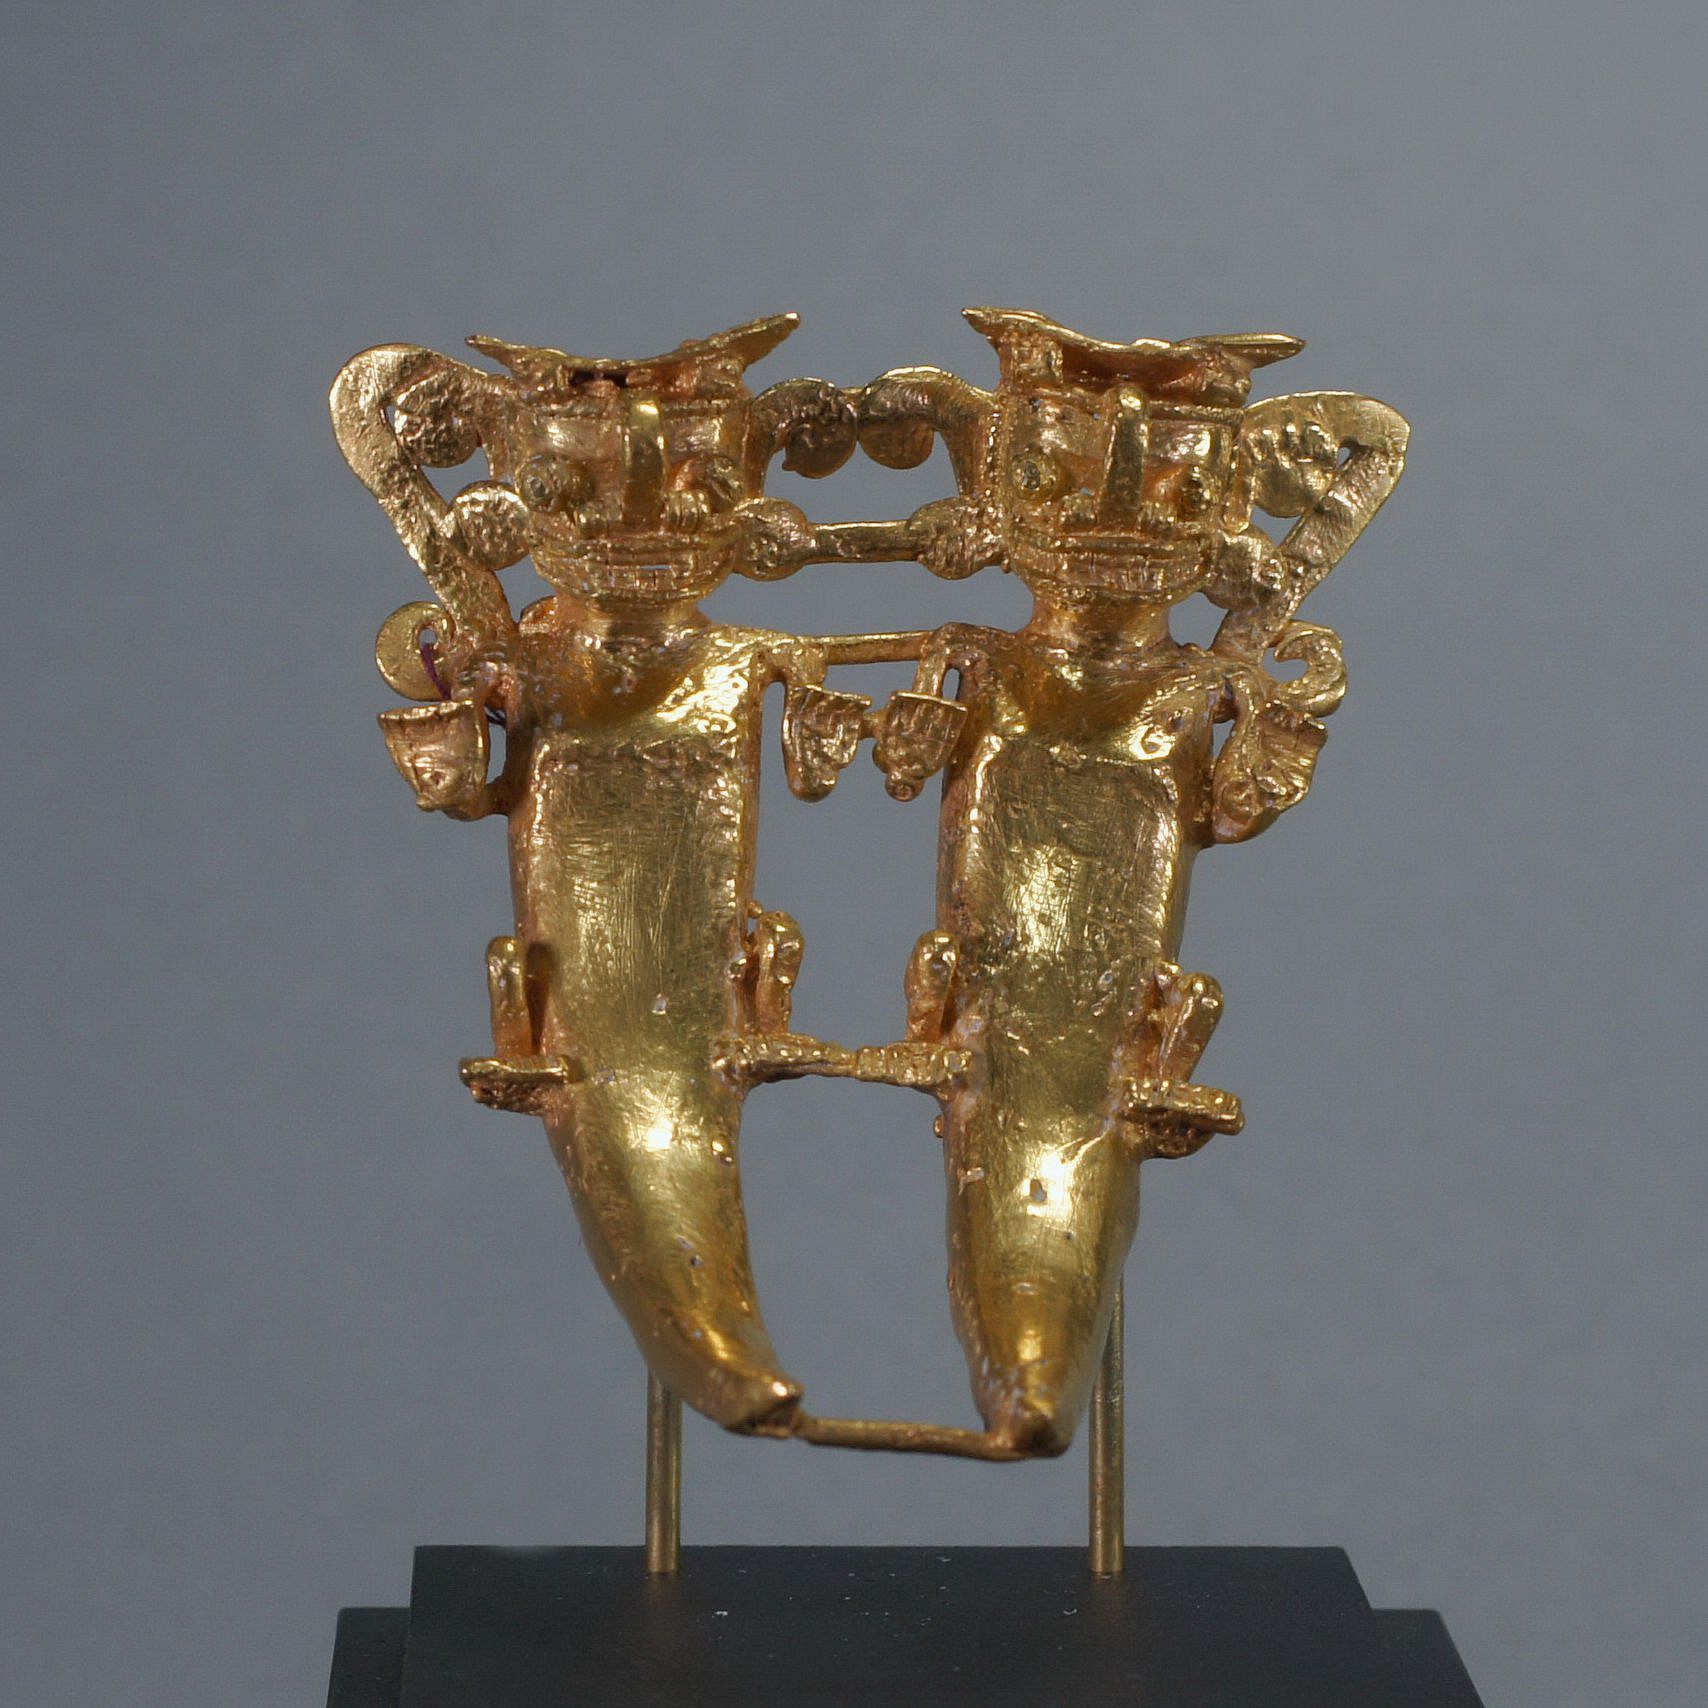 Panama, Cocle Cast Gold Pendant of Pair Anthropomorphized Bats
Lost Was cast depicting paired figures with bat faces, human hands, and a corcodilian body and tail. Duality was a known belief of the natural world: male and female, night and day, heaven and earth. Bats are nocturnal creatures and ruled the darkness.  There are two cast suspension loops behind each outside shoulder. Ex. New York collector, prior to 1970.
Media: Metal
Dimensions: Width 2 3/4" x Length: 3 1/8"  Weight 100.6 gramsXRF
&bull;SOLD
n7027